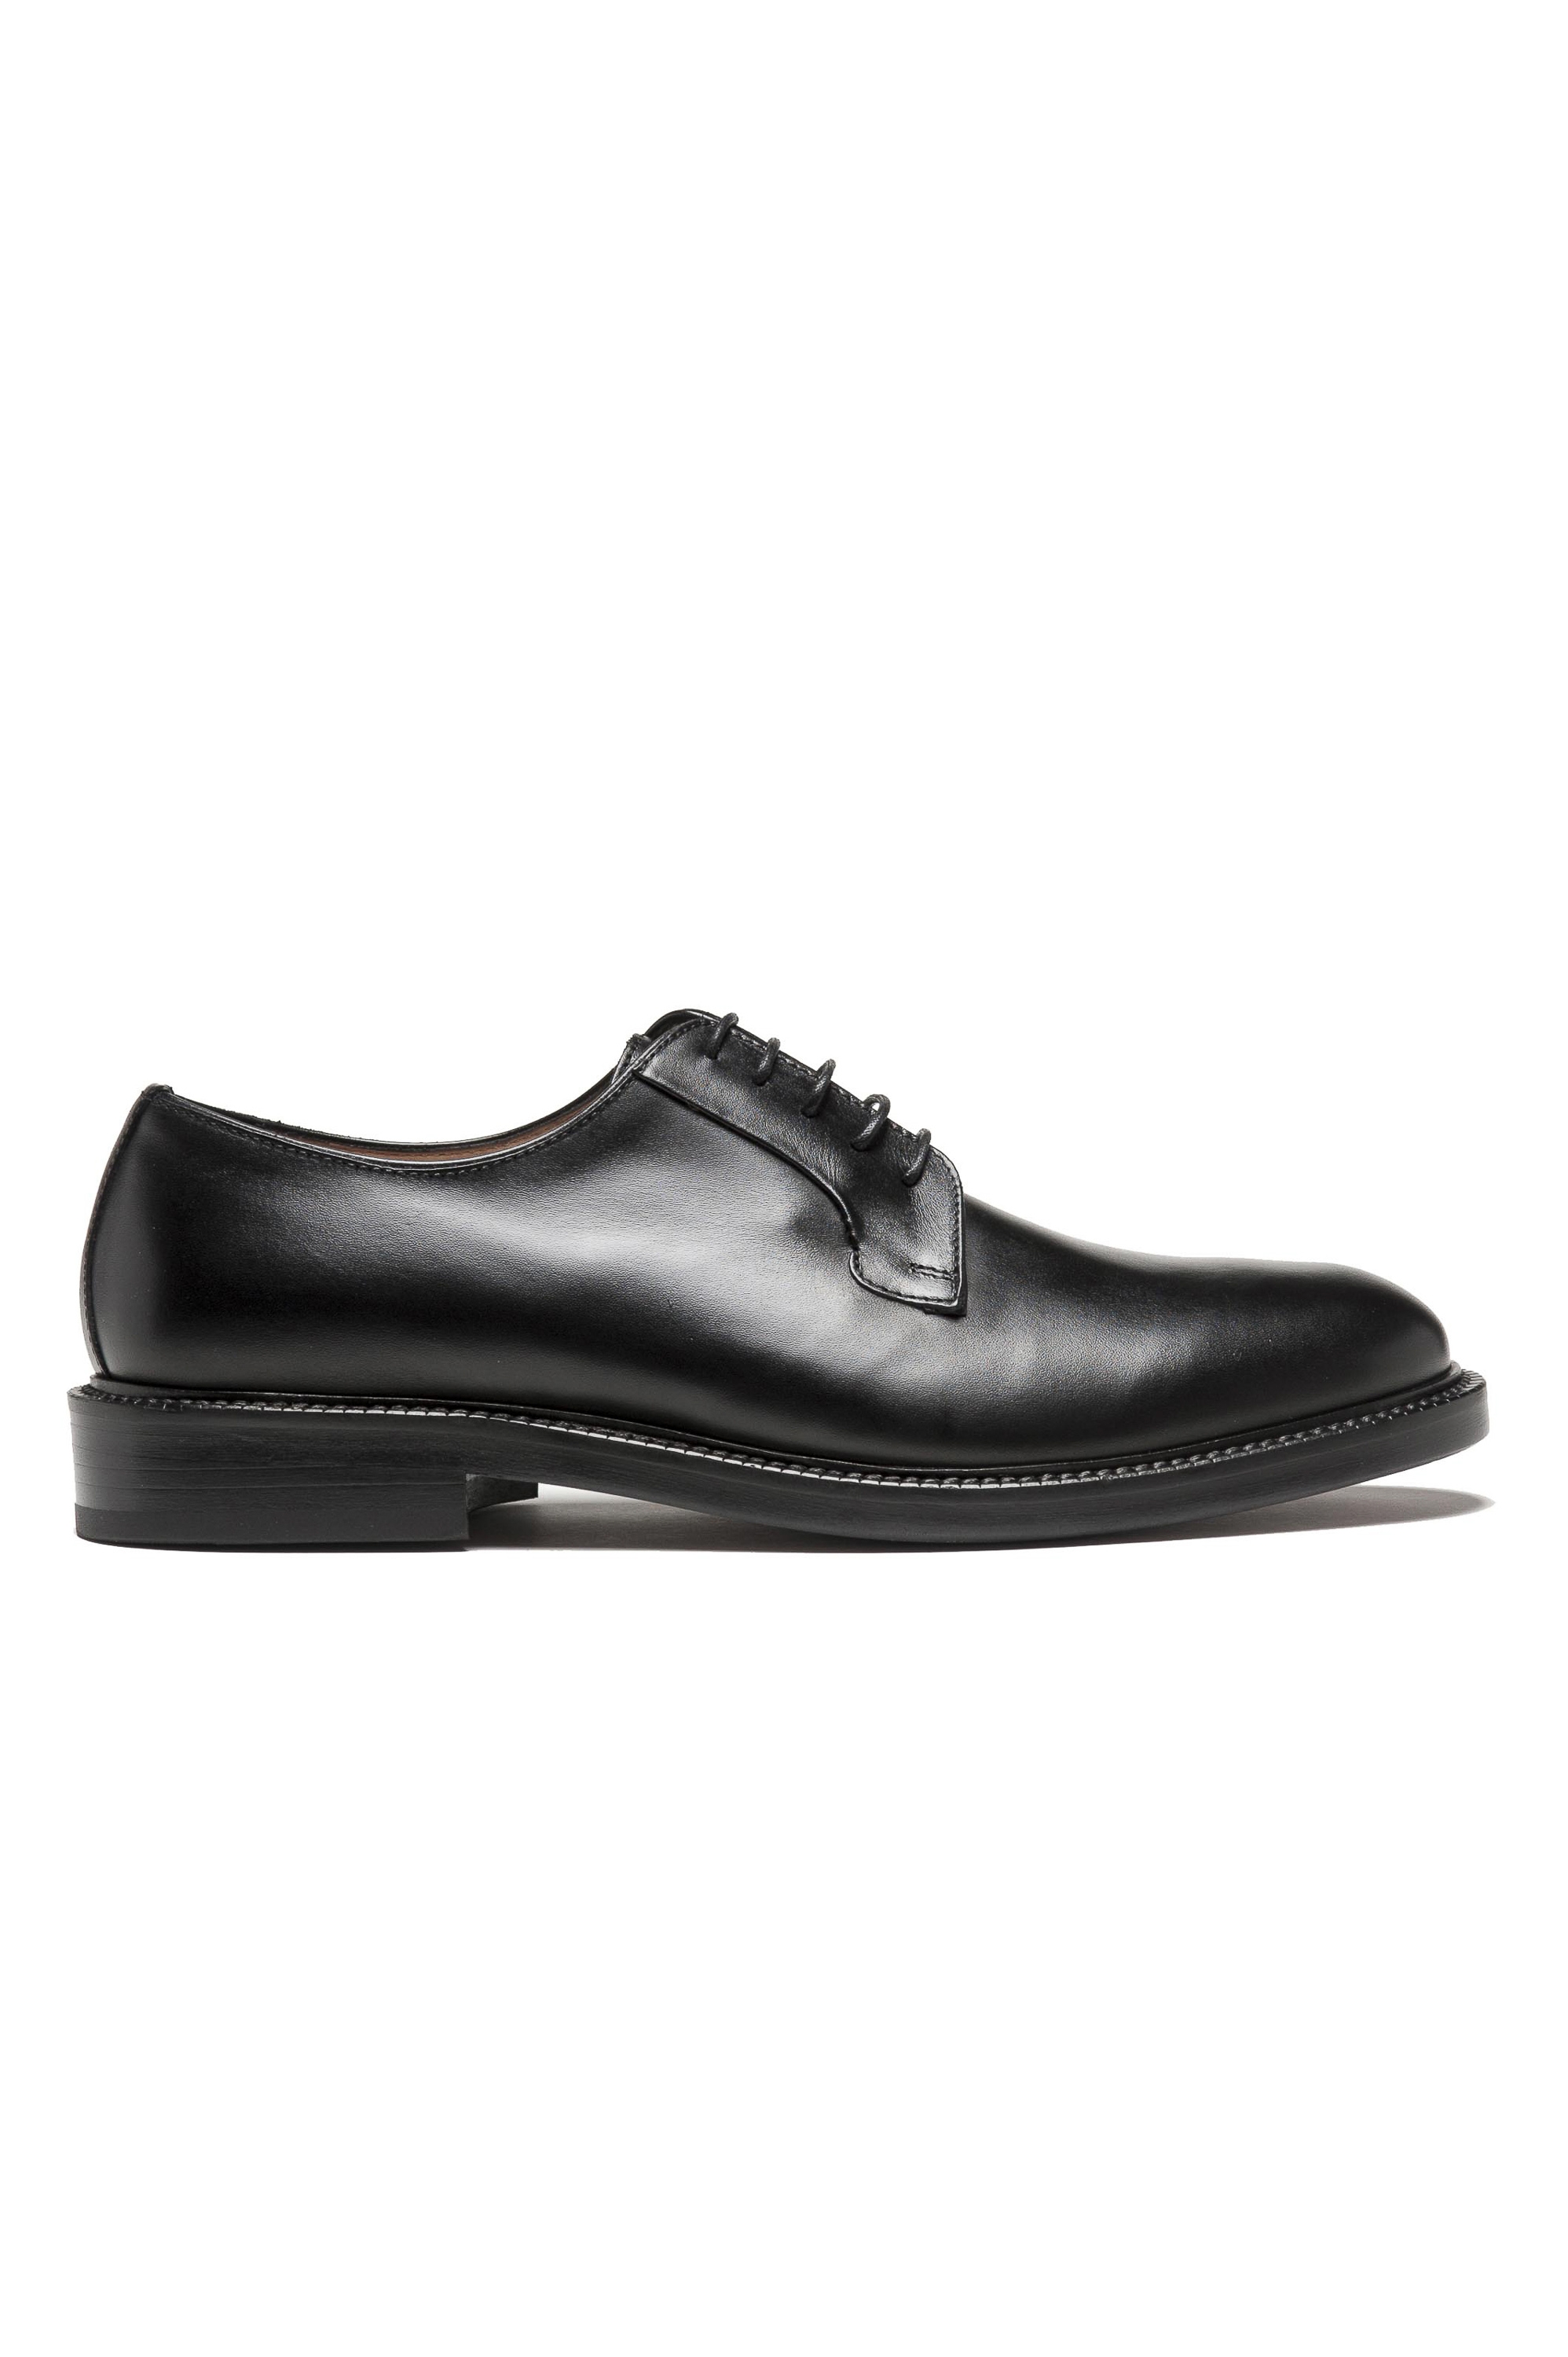 SBU 01502_19AW Black lace-up plain calfskin derbies with leather sole 01